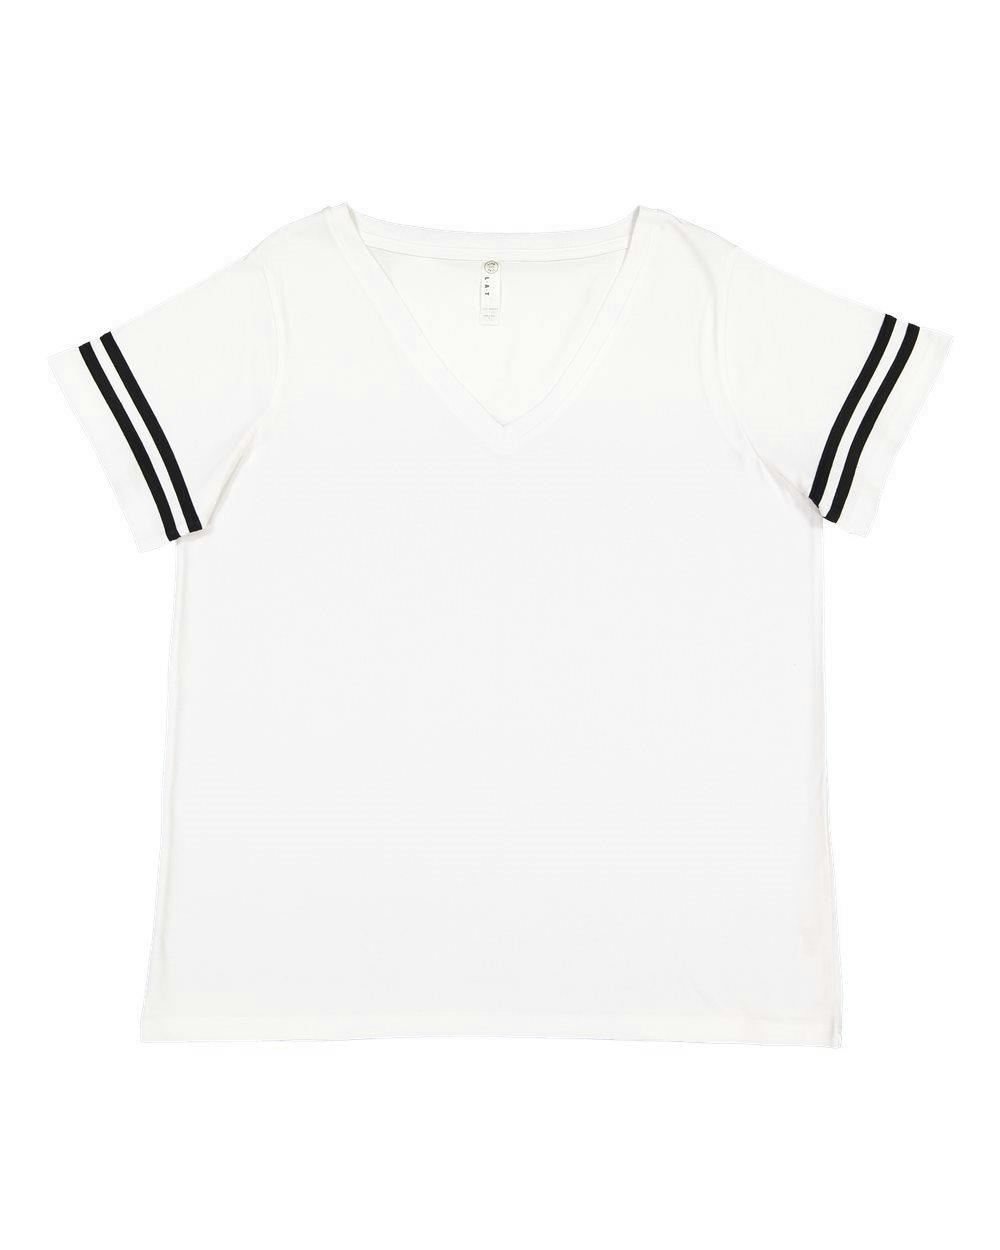 Image for Curvy Collection Women's Vintage Football T-Shirt - 3837